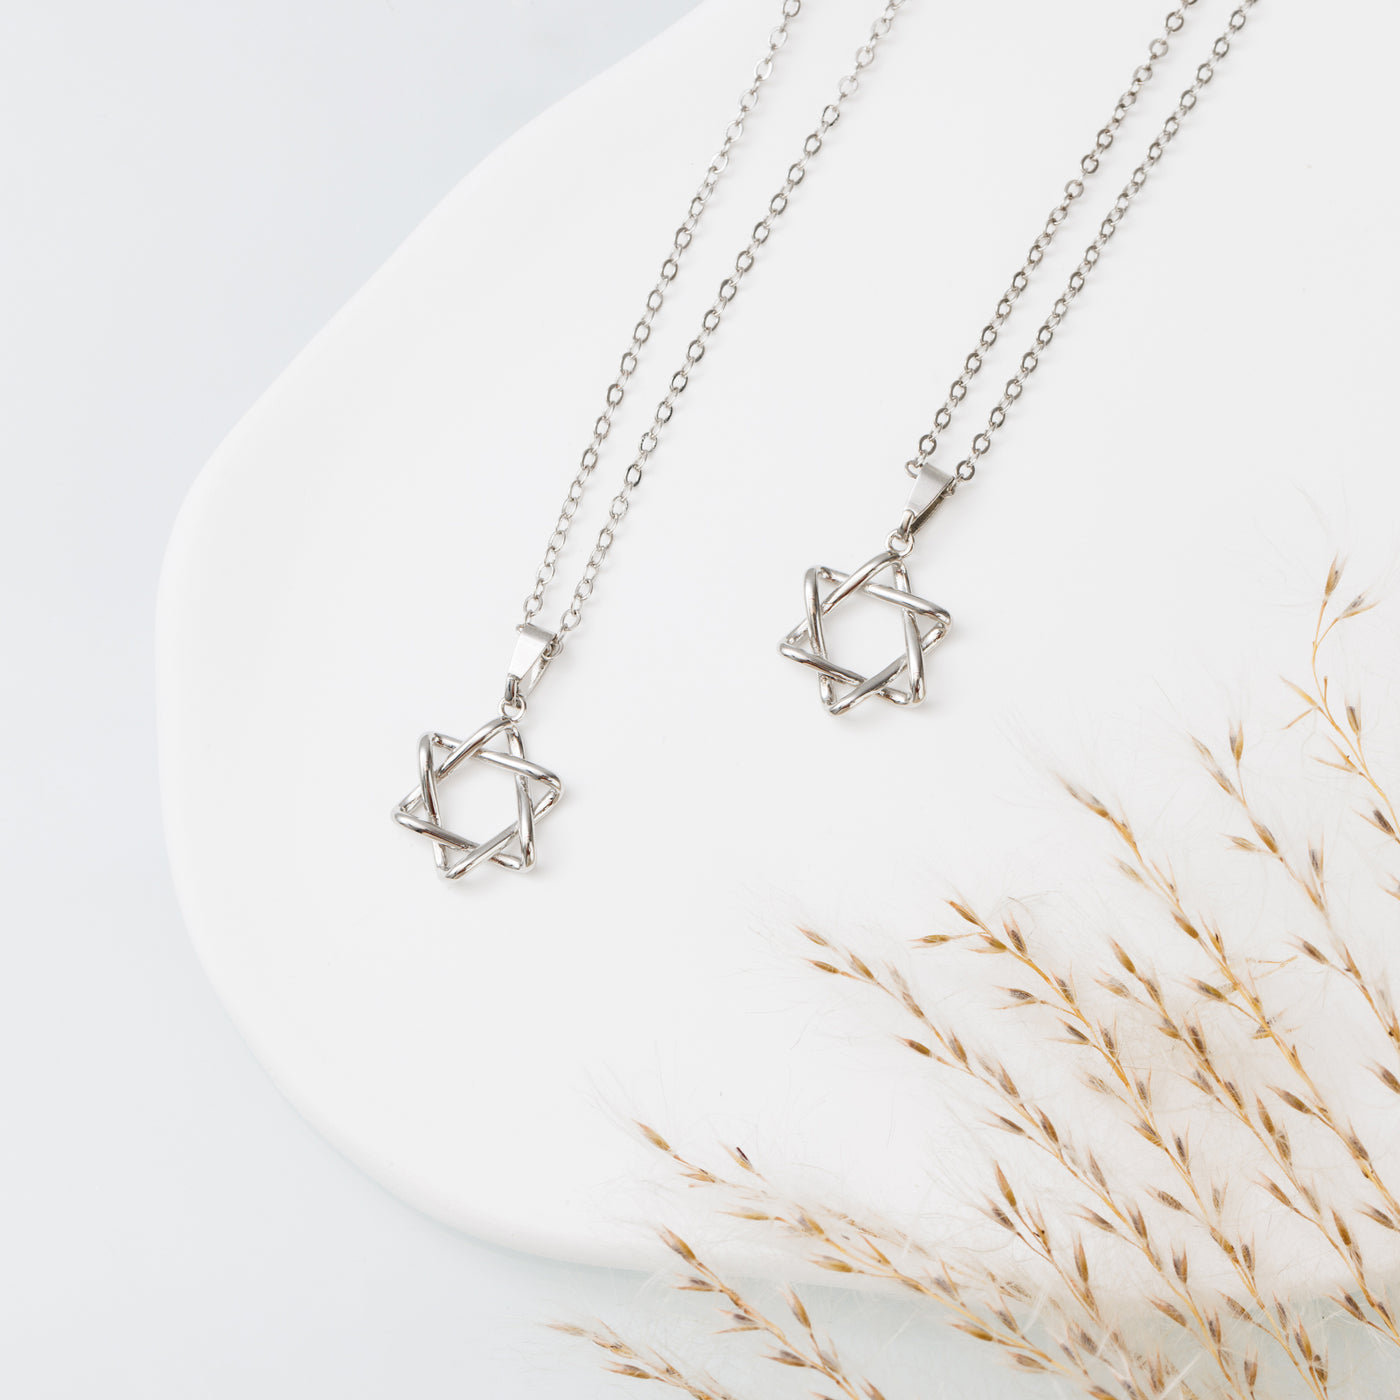 Star of David Necklace with Clean Lines - Debby